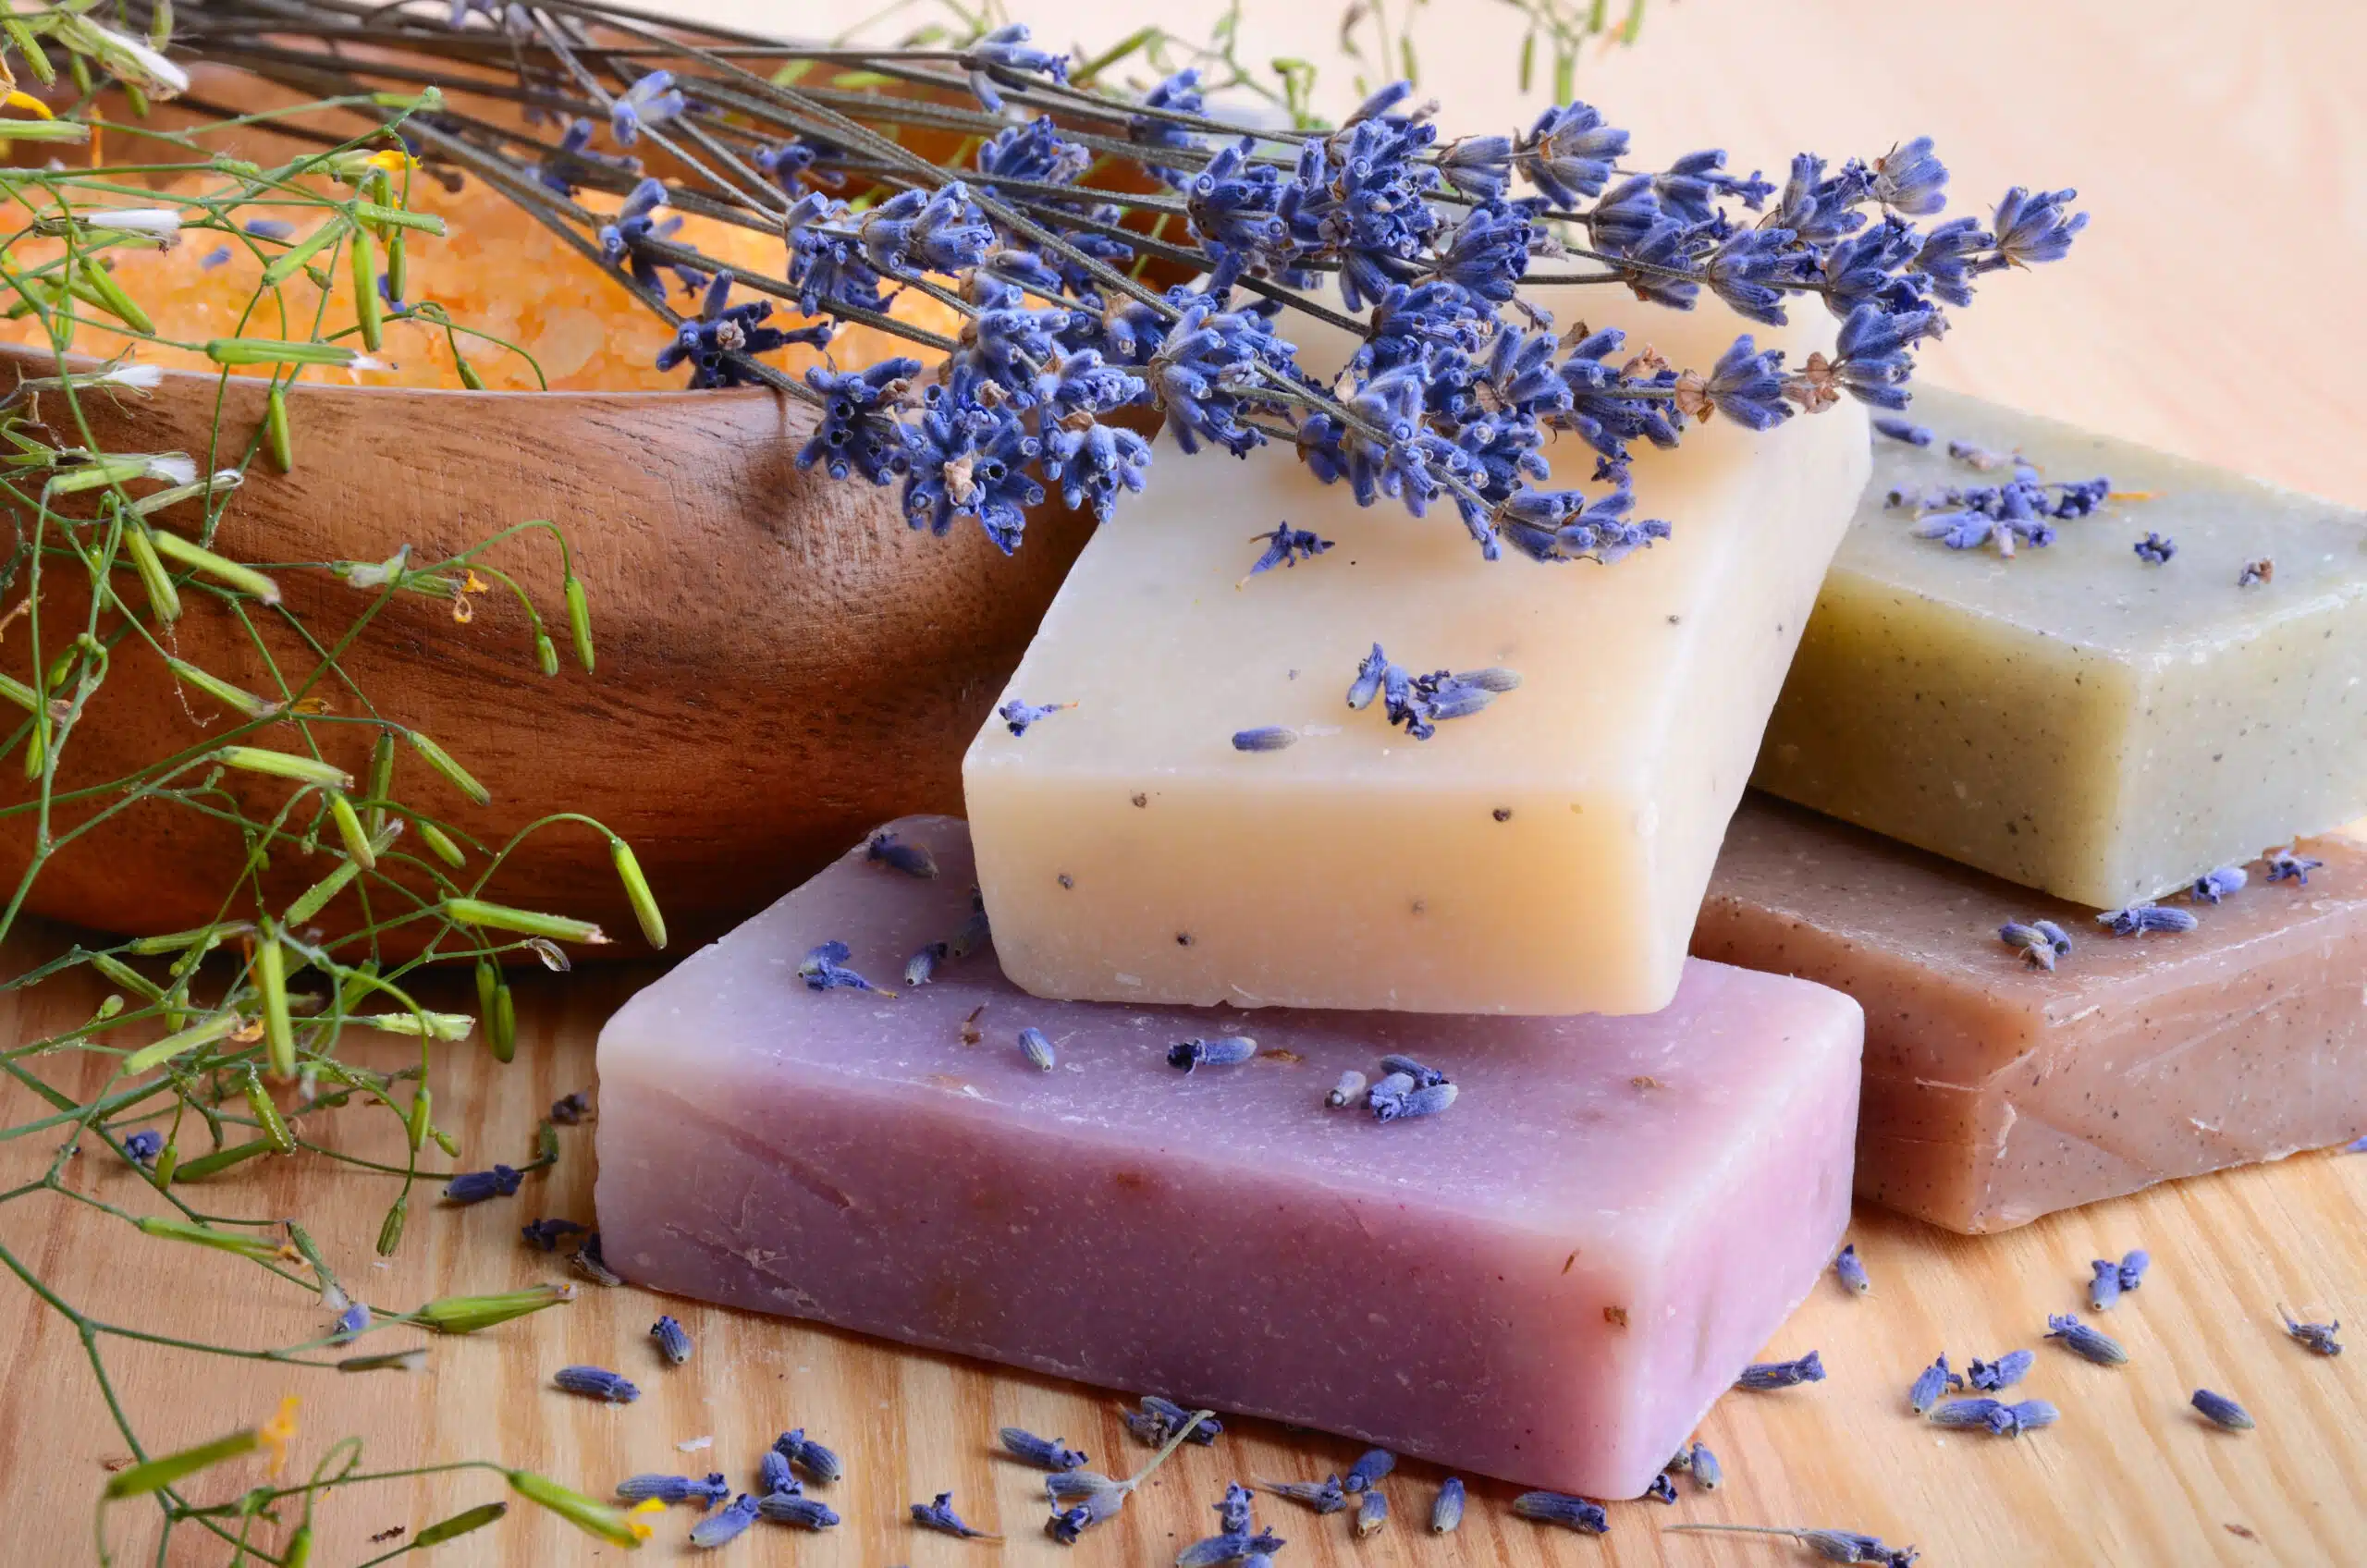 Natural handmade body care soaps with salt and lavender flowers